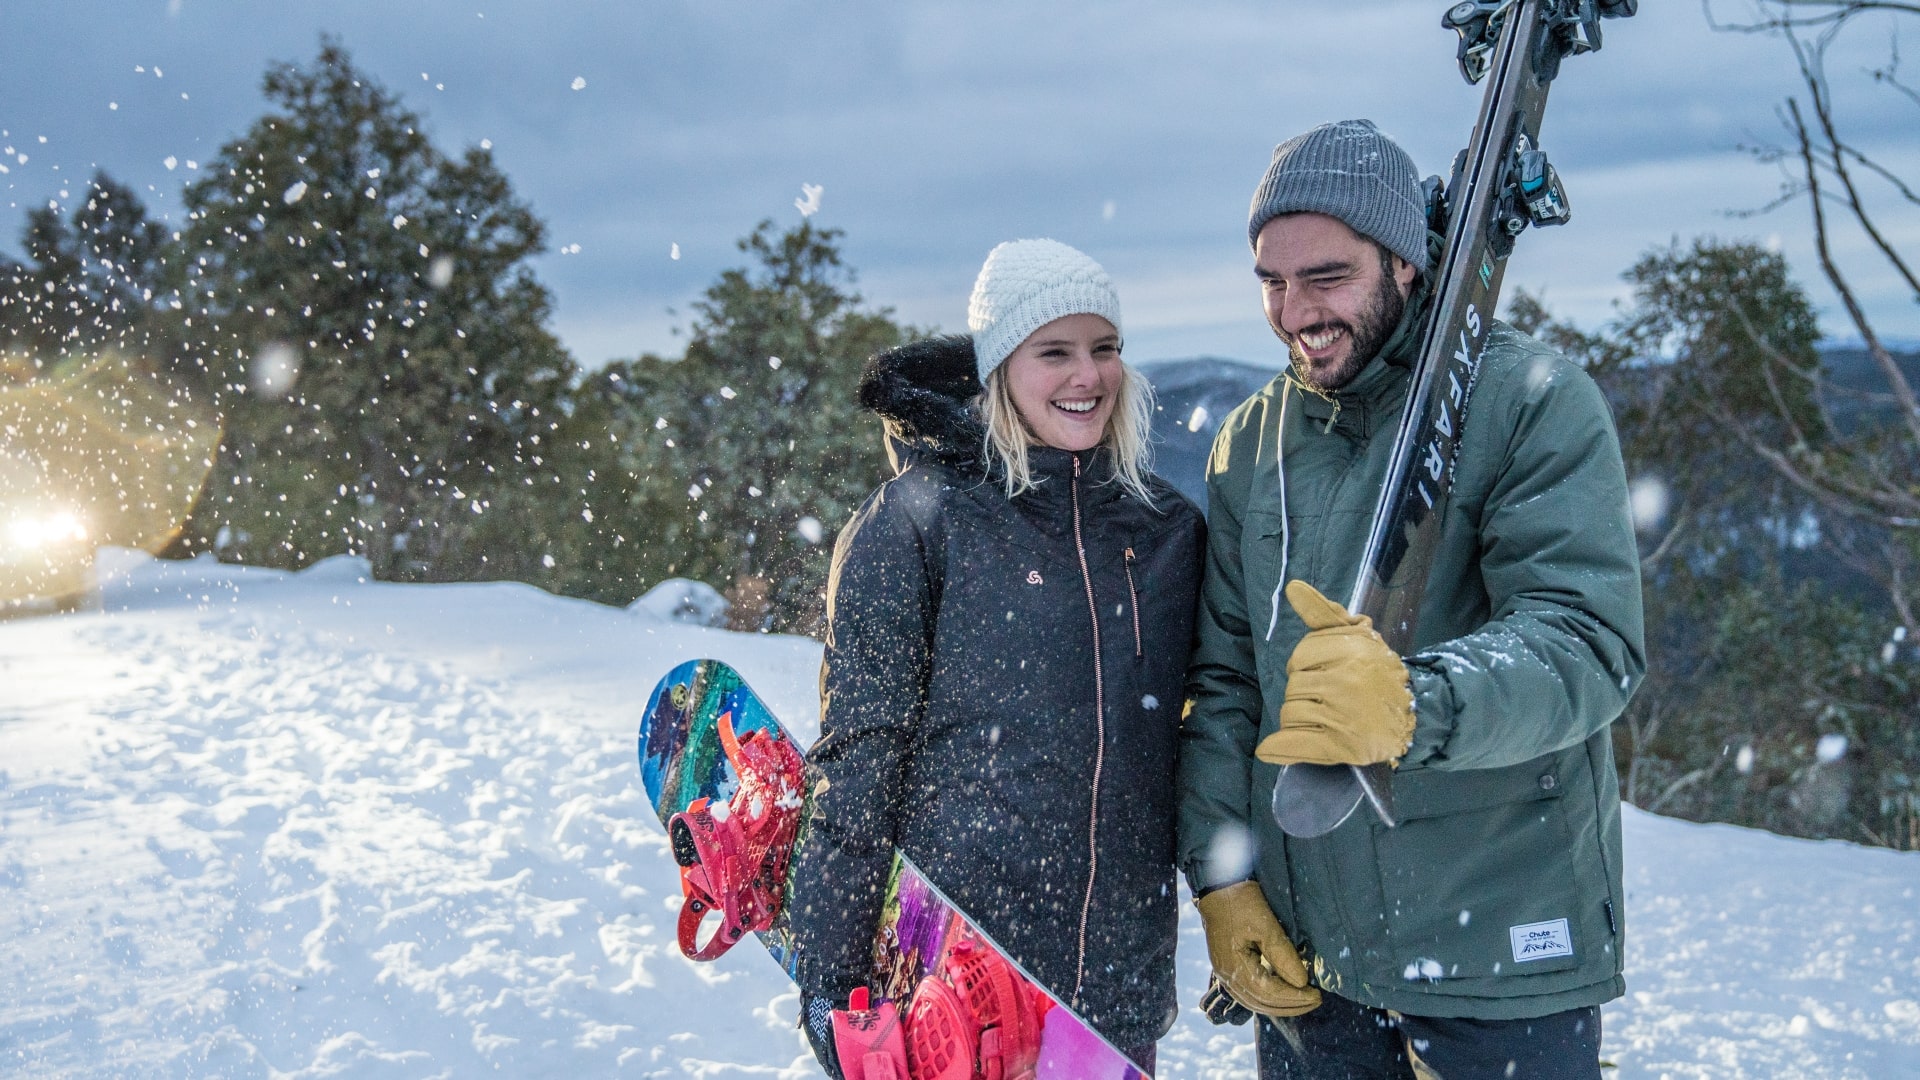 Man and woman in snow gear holding a snowboard and skiis